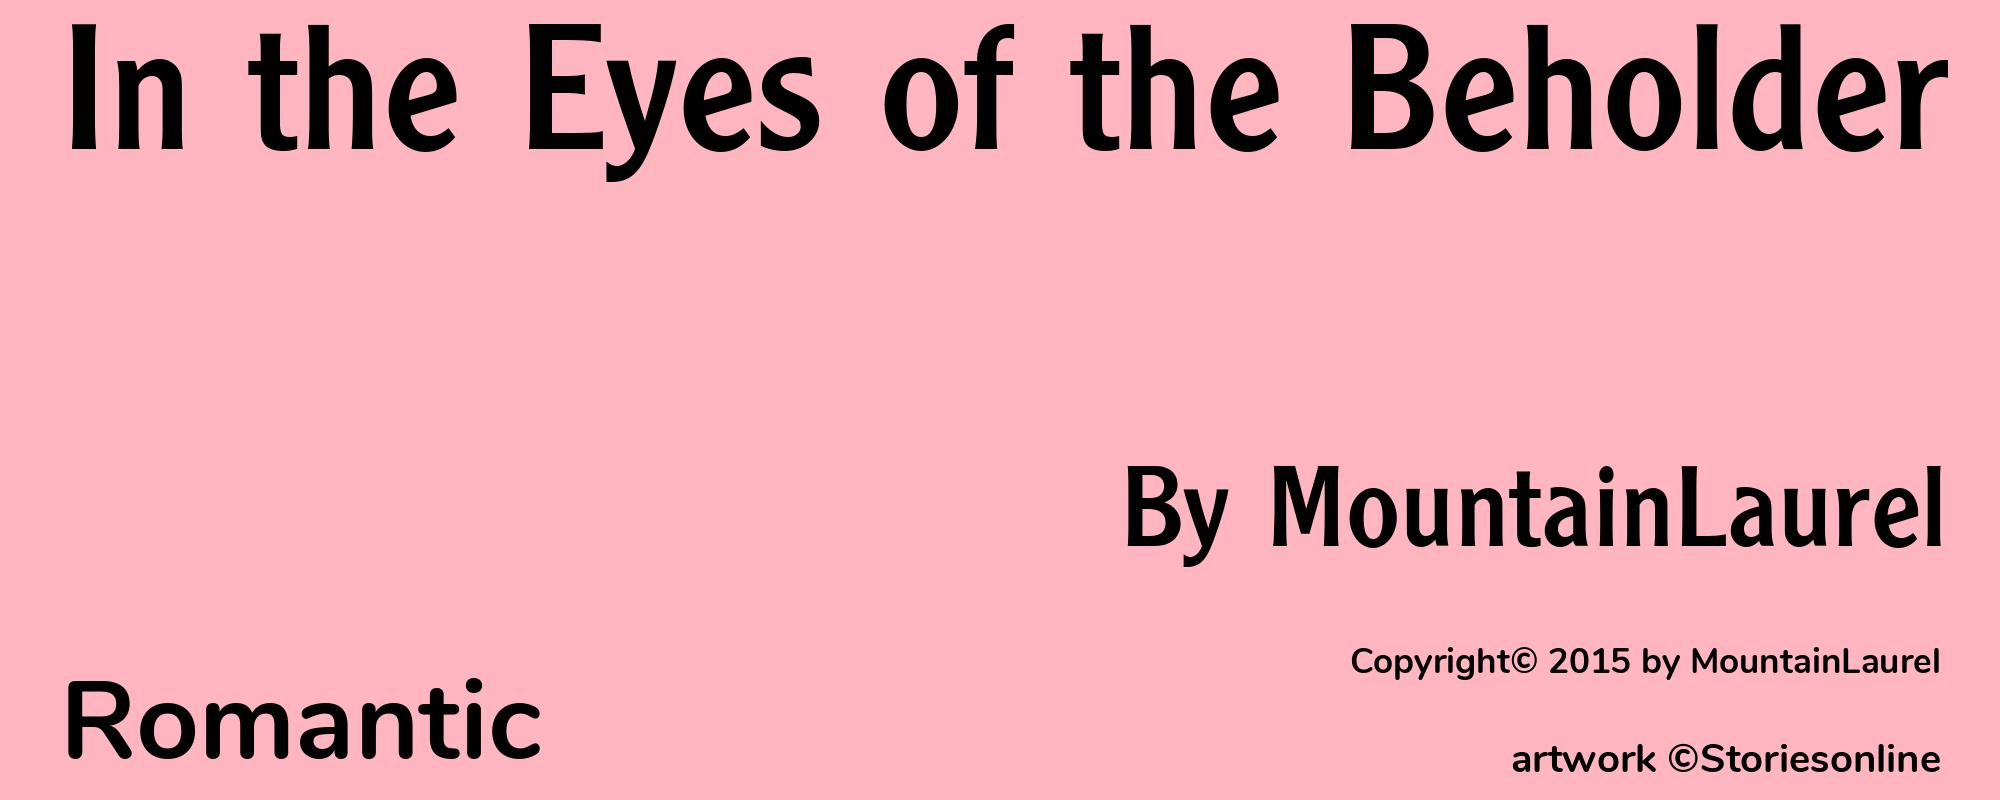 In the Eyes of the Beholder - Cover